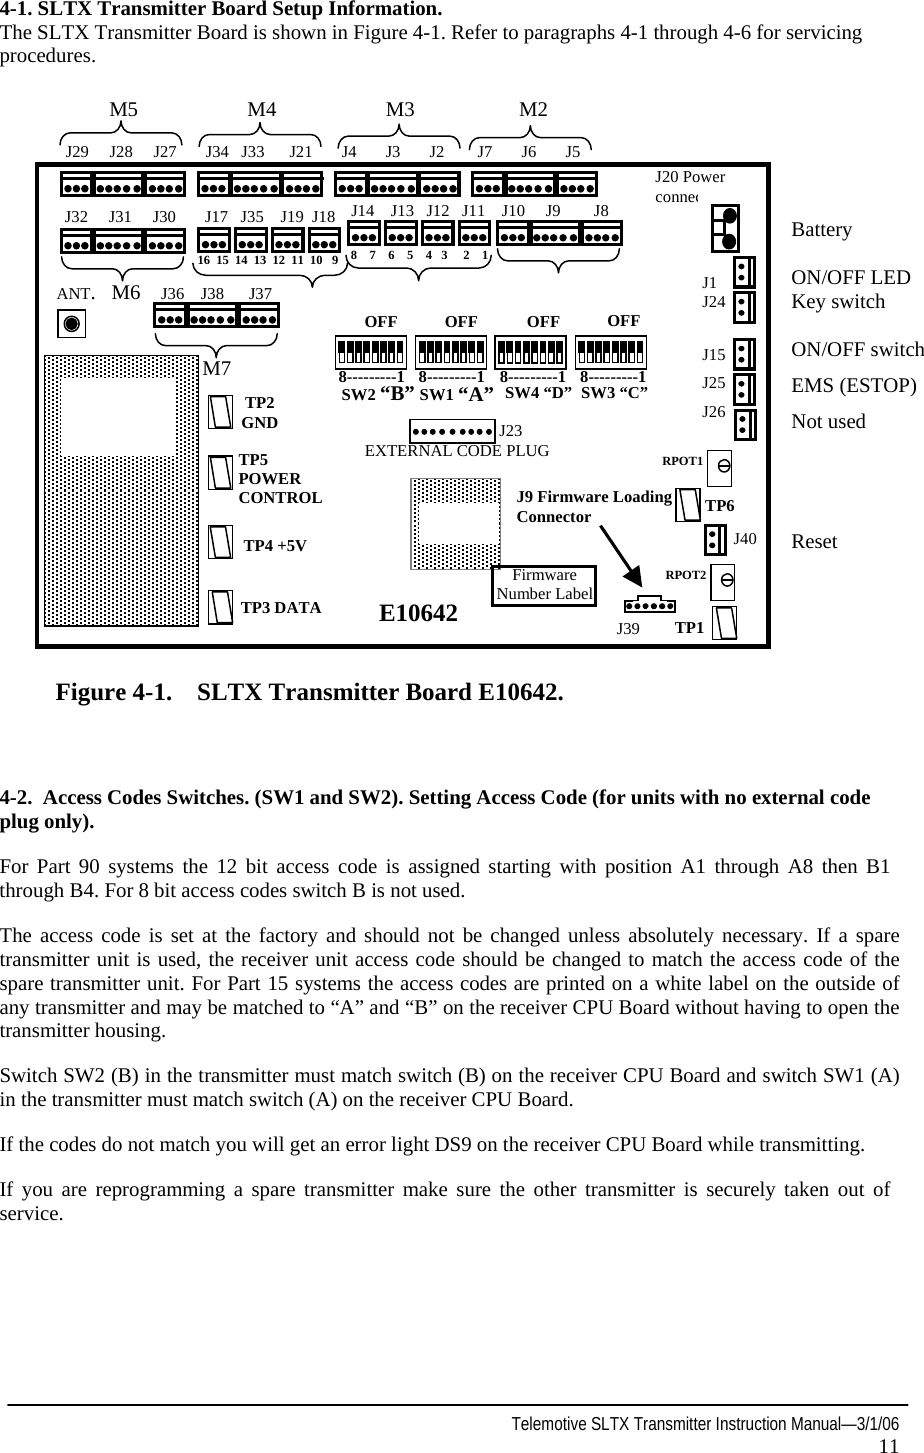  Telemotive SLTX Transmitter Instruction Manual—3/1/06 11  Figure 4-1. SLTX Transmitter Board E10642. TP2 GND TP1 TP3 DATA RPOT2 OFF 8---------1 SW1 “A” OFF 8---------1 SW2 “B” OFF 8---------1  SW3 “C” E10642  EEPPRROOMMTP4 +5V J9 Firmware Loading Connector Firmware  Number Label OFF 8---------1  SW4 “D” TP5 POWER CONTROL  TP6 J29     J28     J27       J34   J33      J21       J4       J3       J2        J7       J6       J5J32     J31     J30       J17   J35    J19  J18    J14    J13   J12   J11    J10     J9        J8      ANT.   M6     J36    J38      J37         J20 Power connector J1 J24  J15  J25  J26 J40 J39RPOT1 J23       M5                     M4                     M3                    M2 16  15  14  13  12  11  10   9  8    7    6    5    4   3     2    1 M7 EXTERNAL CODE PLUG Battery  ON/OFF LED Key switch  ON/OFF switch  EMS (ESTOP)  Not used     Reset 4-1. SLTX Transmitter Board Setup Information. The SLTX Transmitter Board is shown in Figure 4-1. Refer to paragraphs 4-1 through 4-6 for servicing procedures. 4-2.  Access Codes Switches. (SW1 and SW2). Setting Access Code (for units with no external code plug only).  For Part 90 systems the 12 bit access code is assigned starting with position A1 through A8 then B1 through B4. For 8 bit access codes switch B is not used. The access code is set at the factory and should not be changed unless absolutely necessary. If a spare transmitter unit is used, the receiver unit access code should be changed to match the access code of the spare transmitter unit. For Part 15 systems the access codes are printed on a white label on the outside of any transmitter and may be matched to “A” and “B” on the receiver CPU Board without having to open the transmitter housing.  Switch SW2 (B) in the transmitter must match switch (B) on the receiver CPU Board and switch SW1 (A) in the transmitter must match switch (A) on the receiver CPU Board. If the codes do not match you will get an error light DS9 on the receiver CPU Board while transmitting.  If you are reprogramming a spare transmitter make sure the other transmitter is securely taken out of service.  